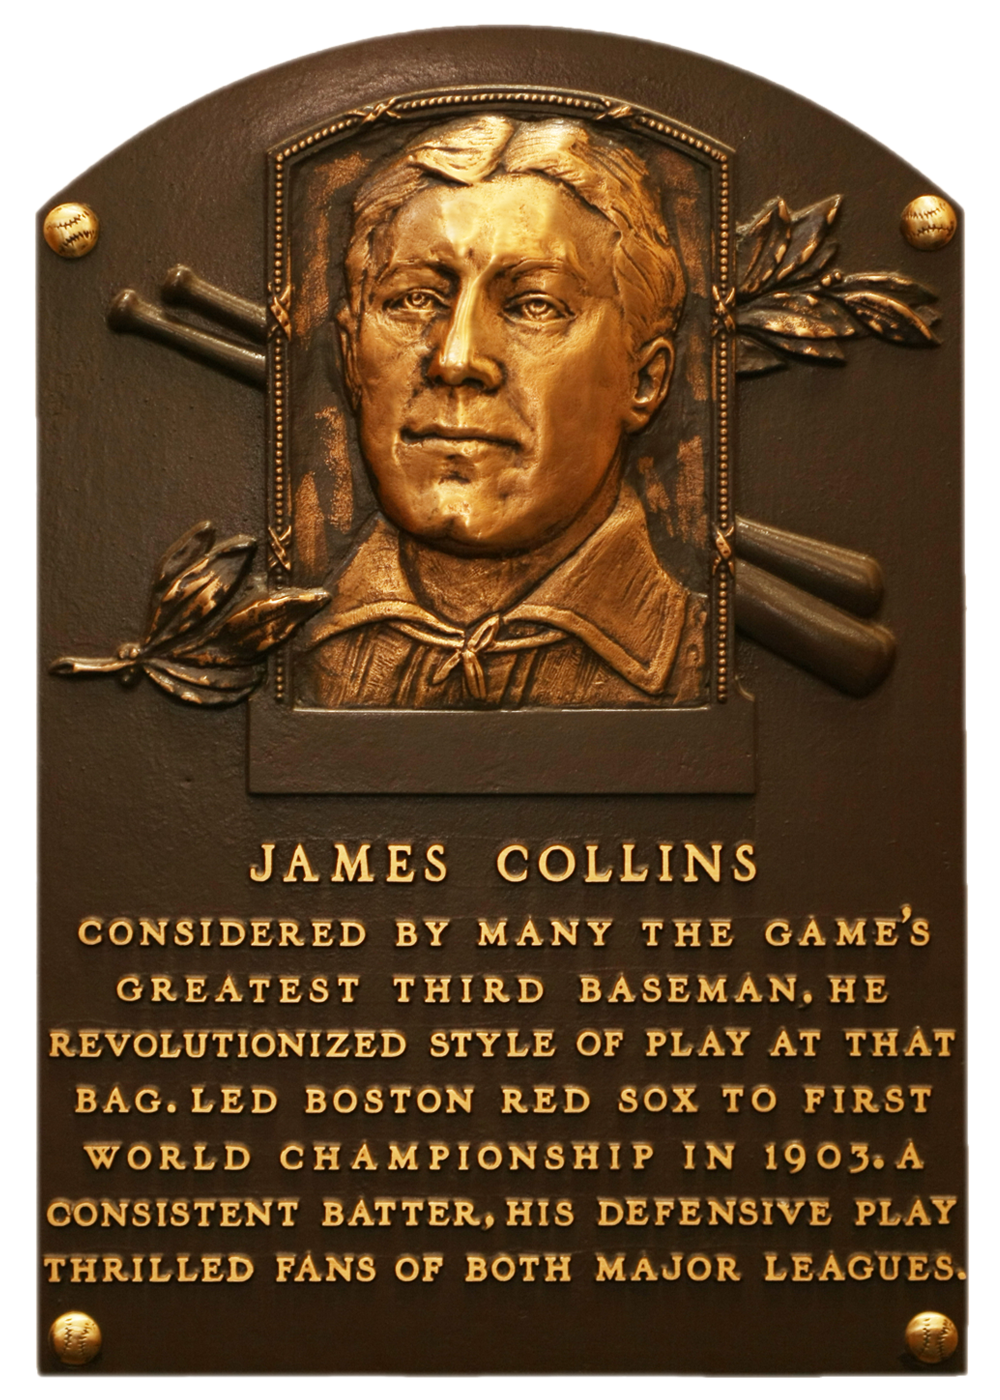 Jimmy Collins Hall of Fame plaque